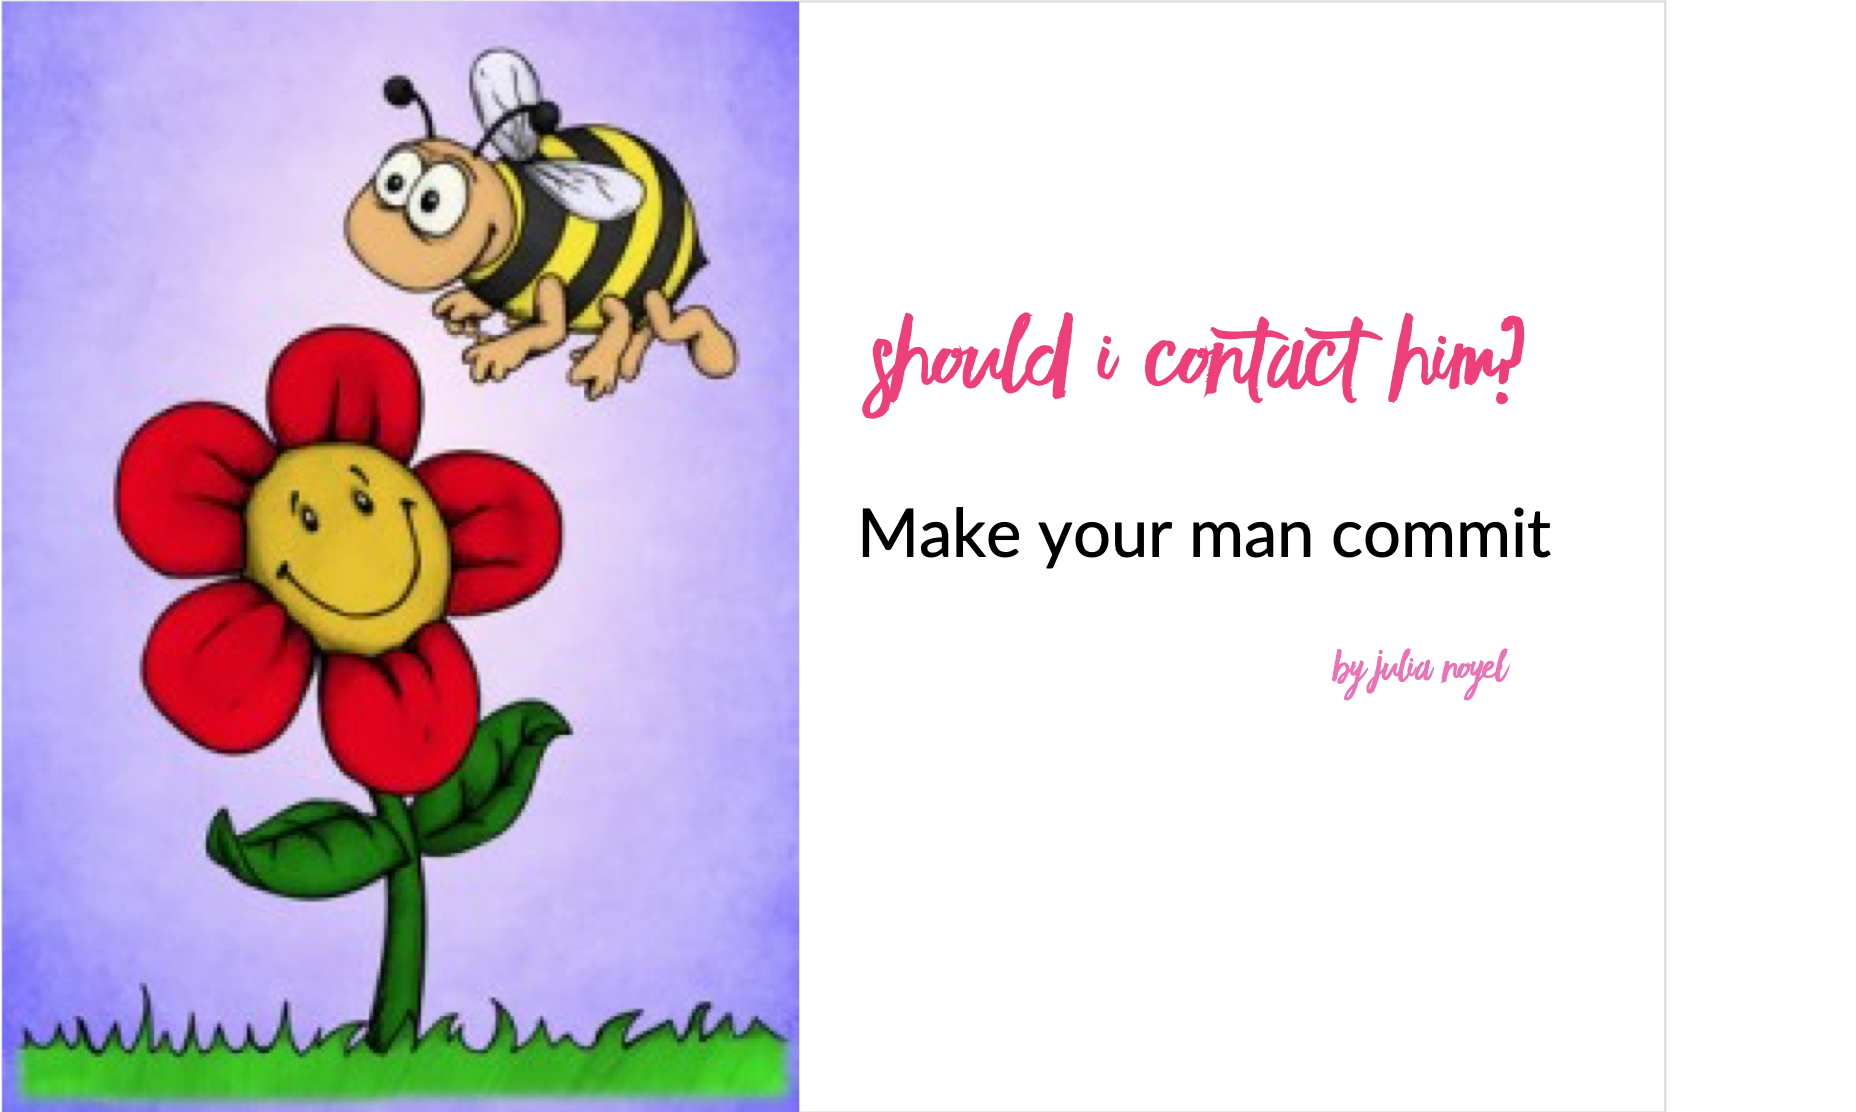 should I contact him- make your man commit by julia noyel